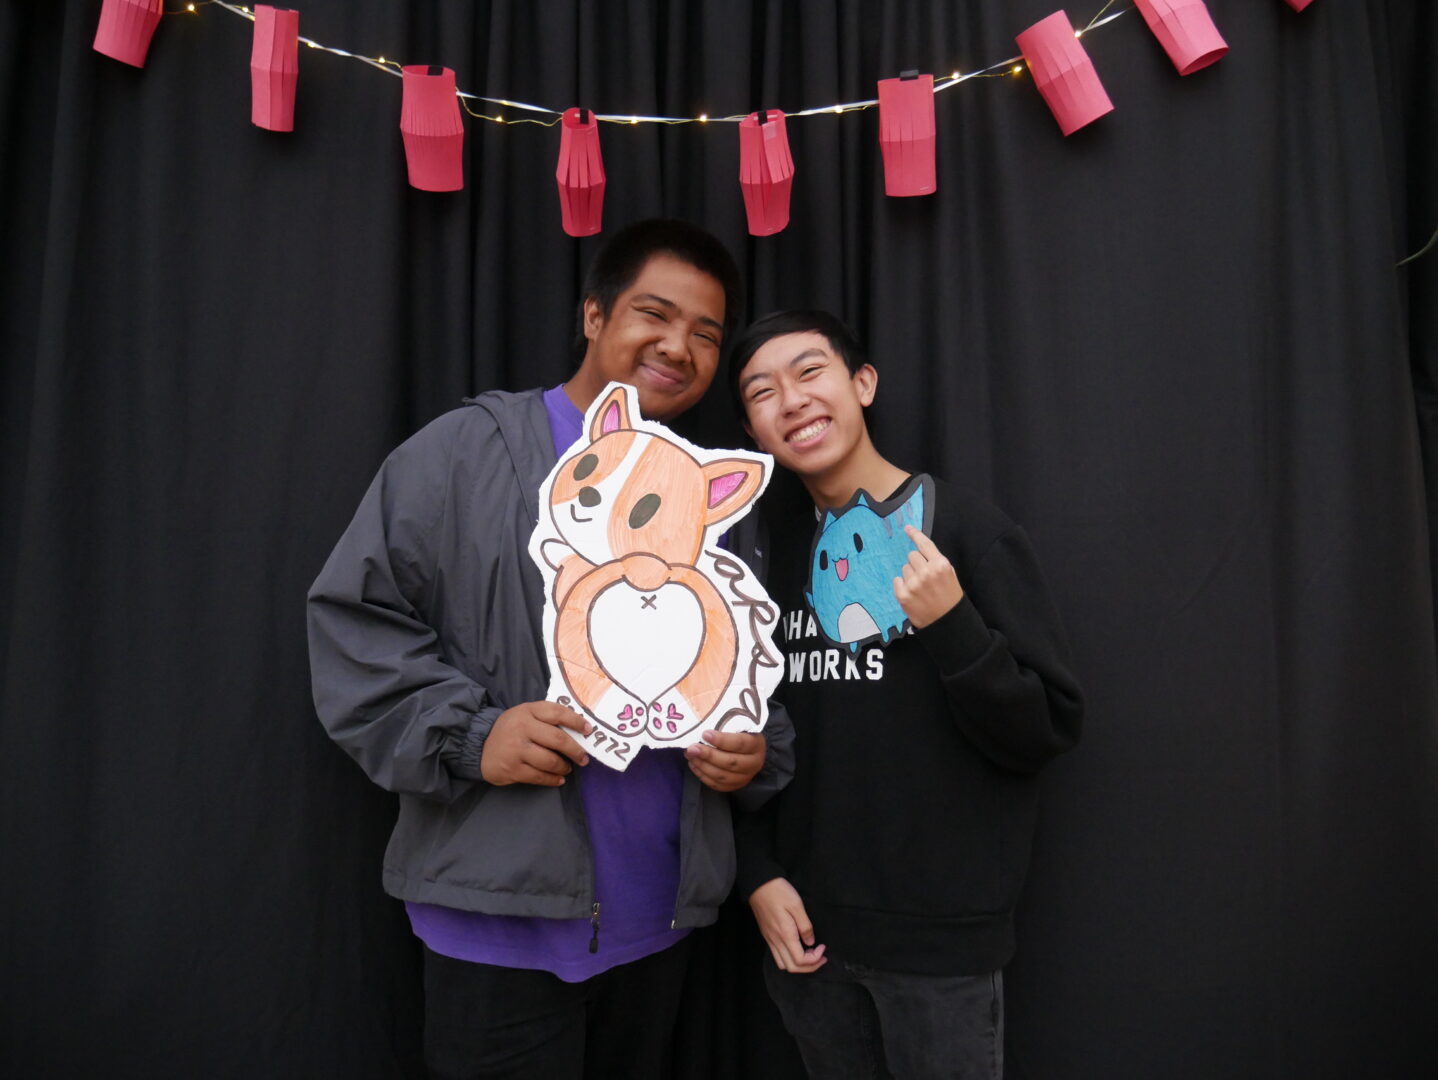 Jeffrey Cardinez (left in purple shirt, holding cardboard cutout of a corgi) stands with his mentee, Jeffrey at an APSA event.